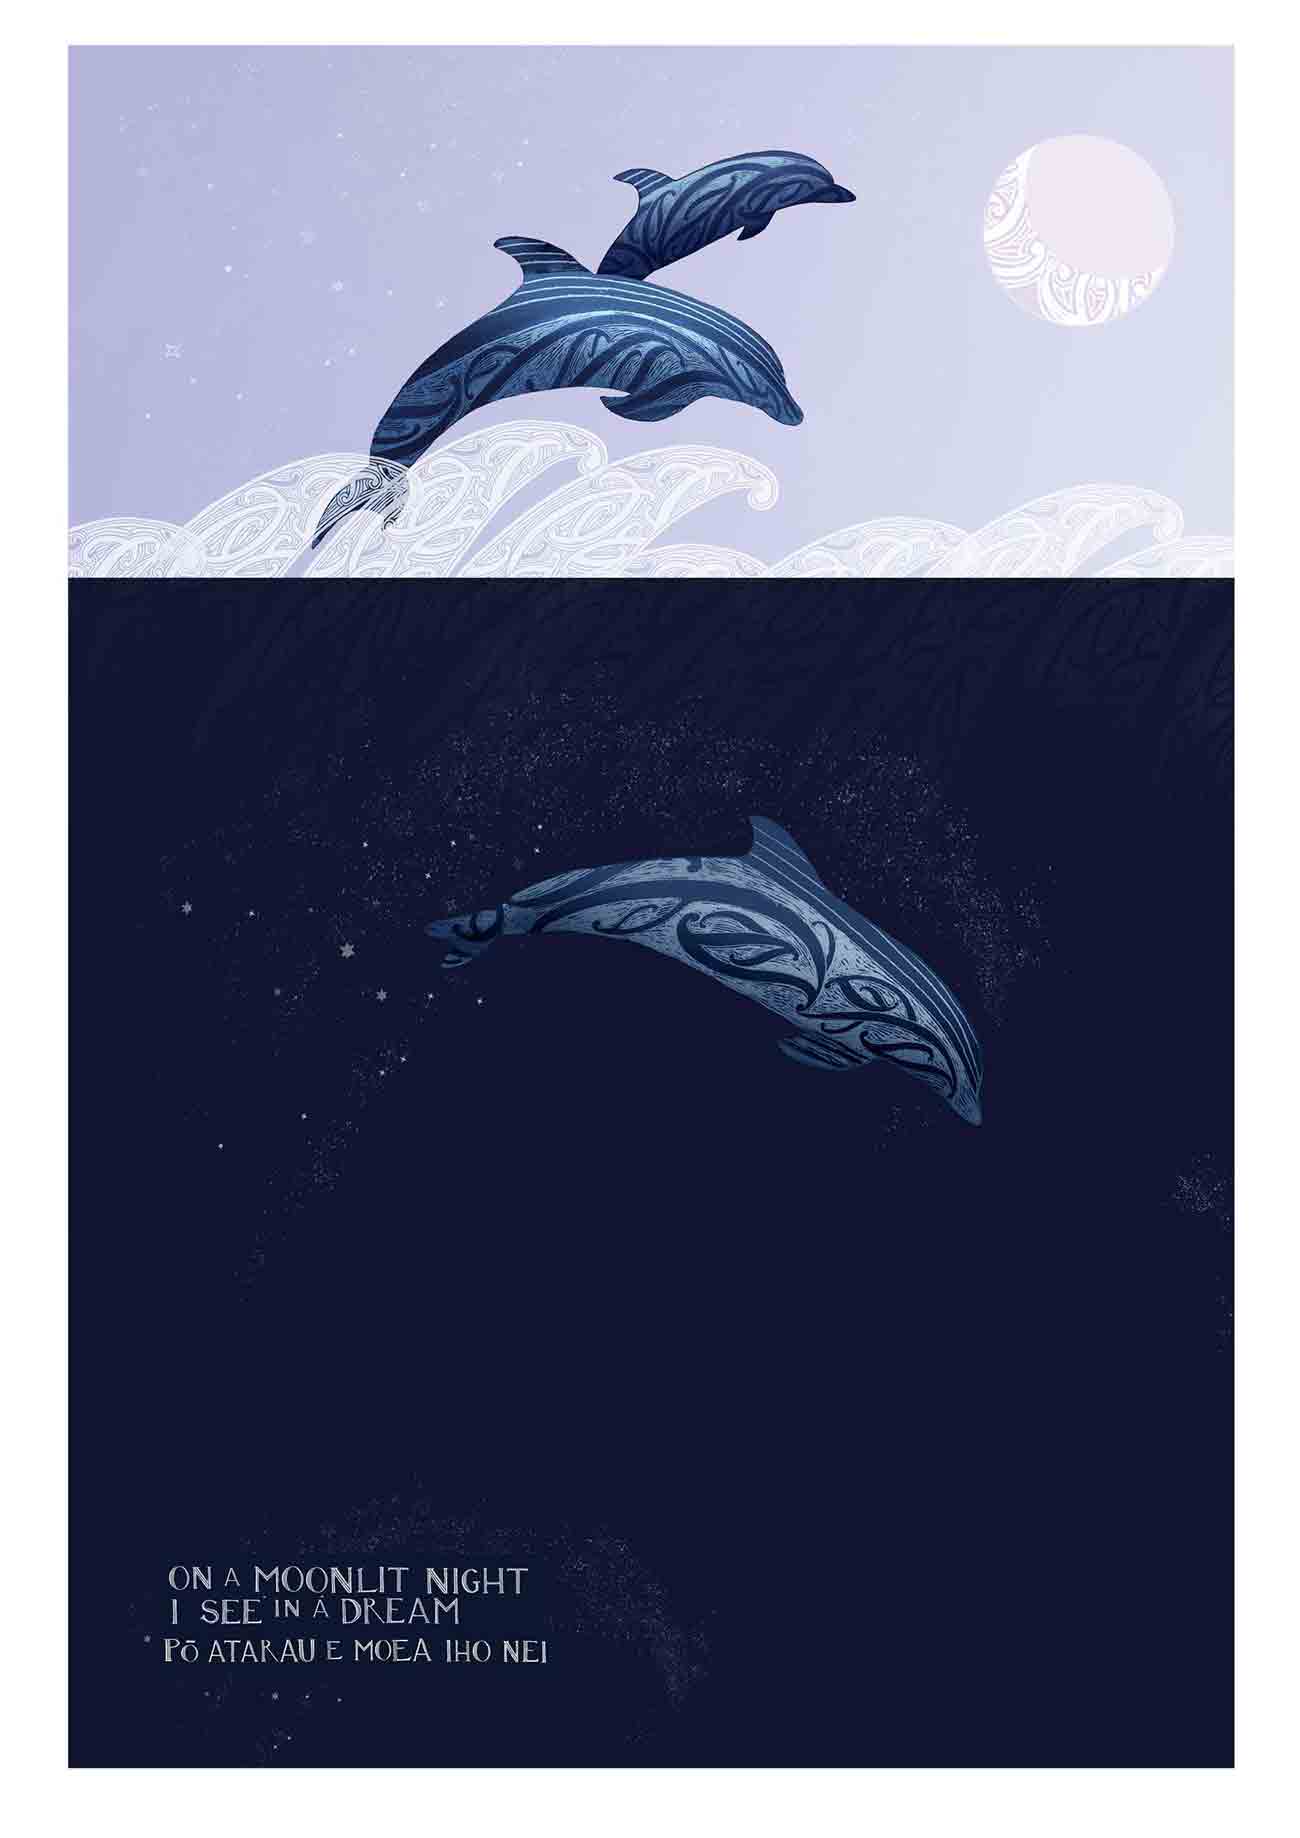 dolphin art print with maori art design elements and words from Po atarau now is the hour in te reo and english. By amber Smith nz artist